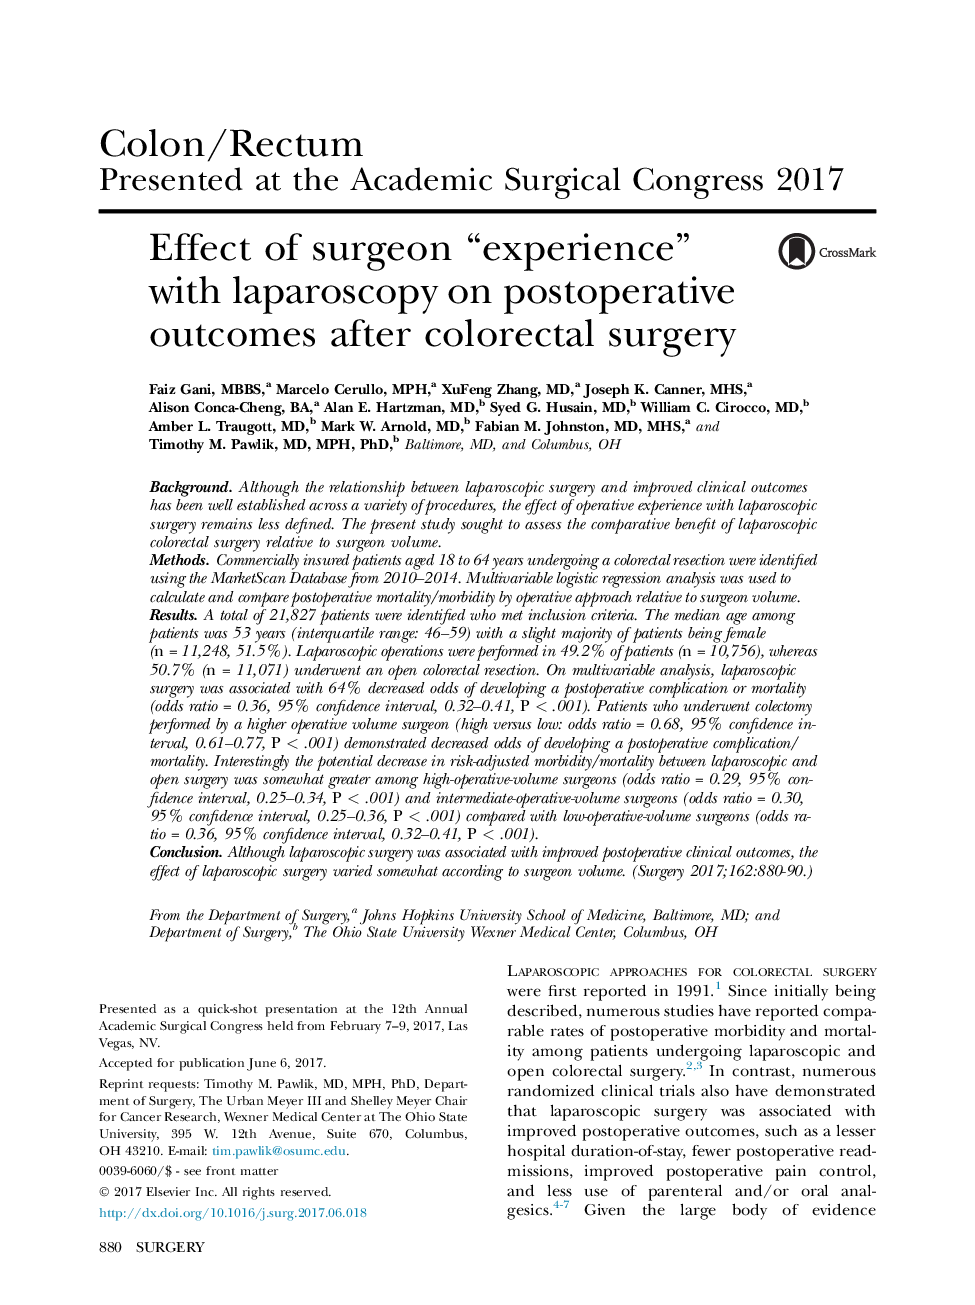 Effect of surgeon “experience” with laparoscopy on postoperative outcomes after colorectal surgery